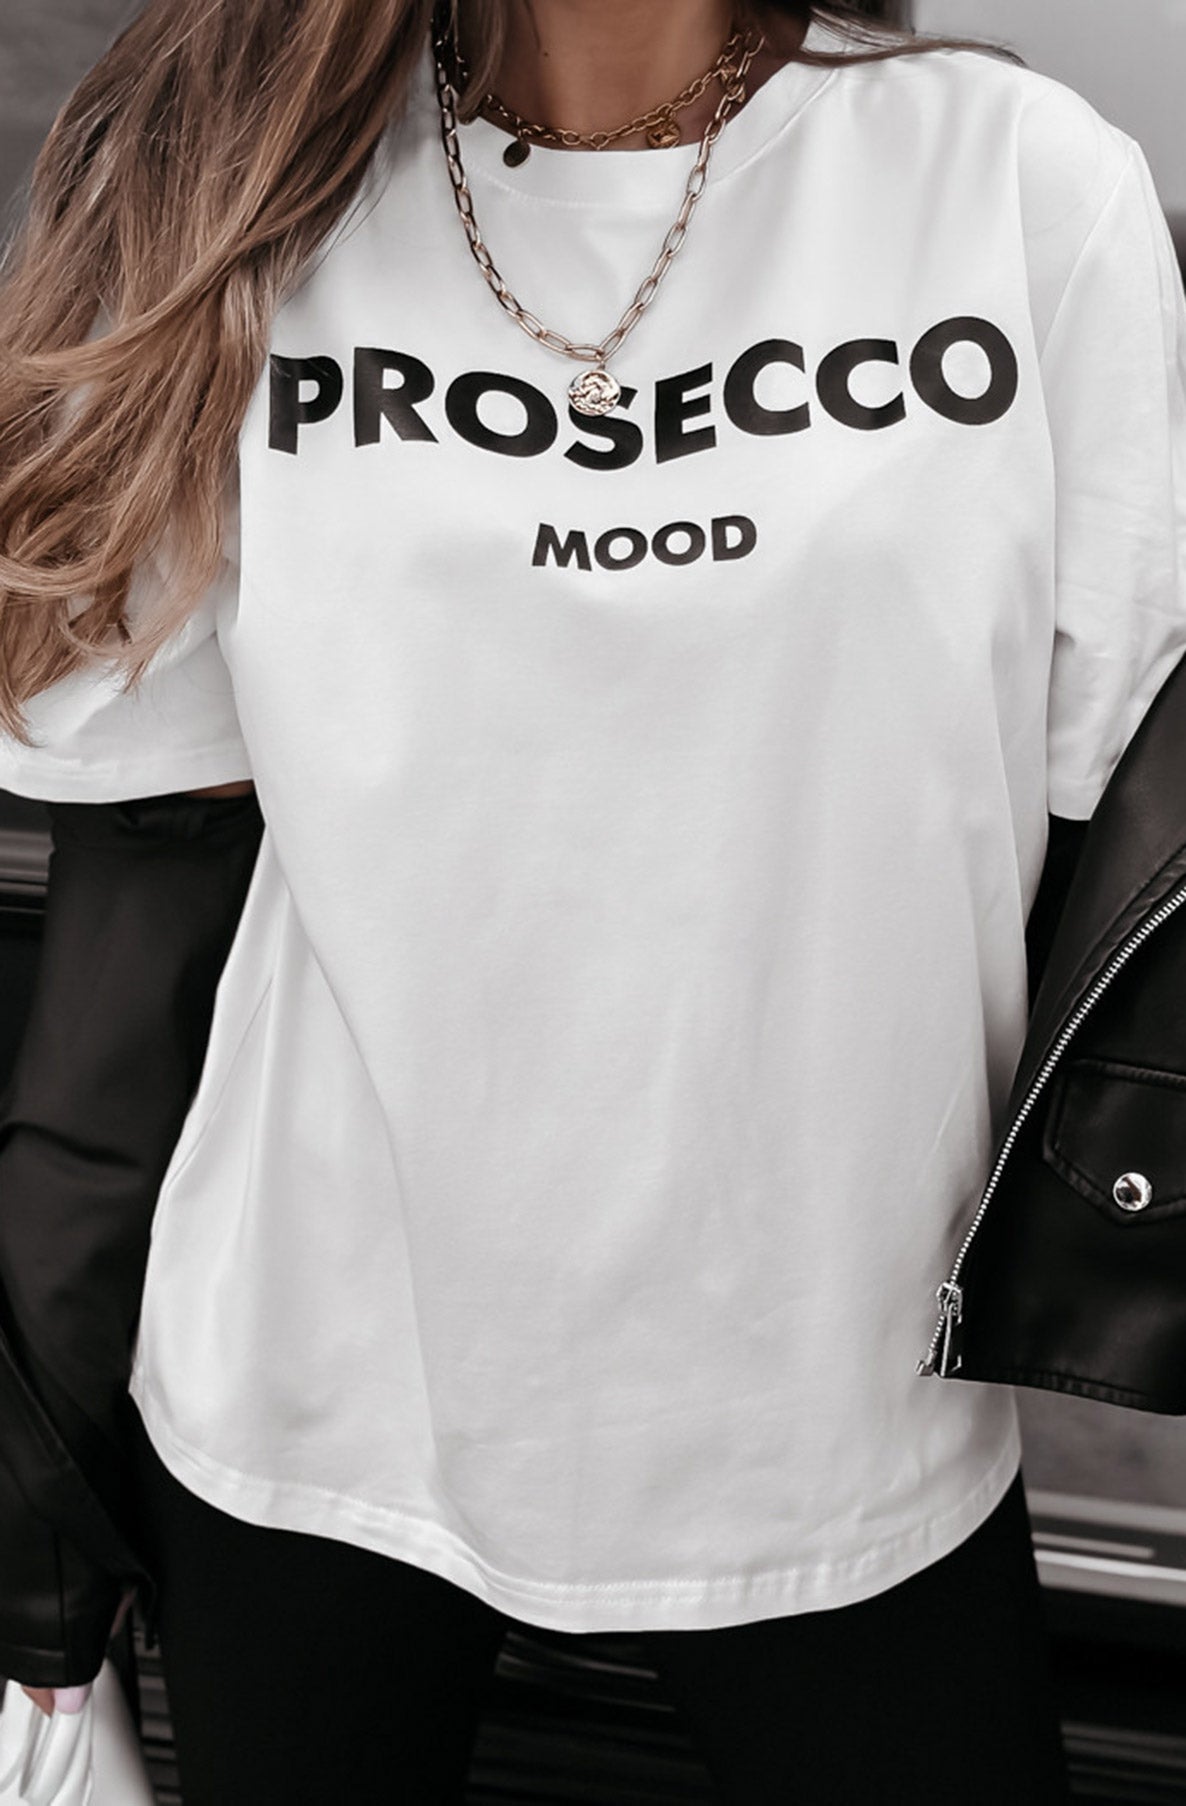 'Prosecco' Mood Printed Oversized T-shirt Top-Ivory